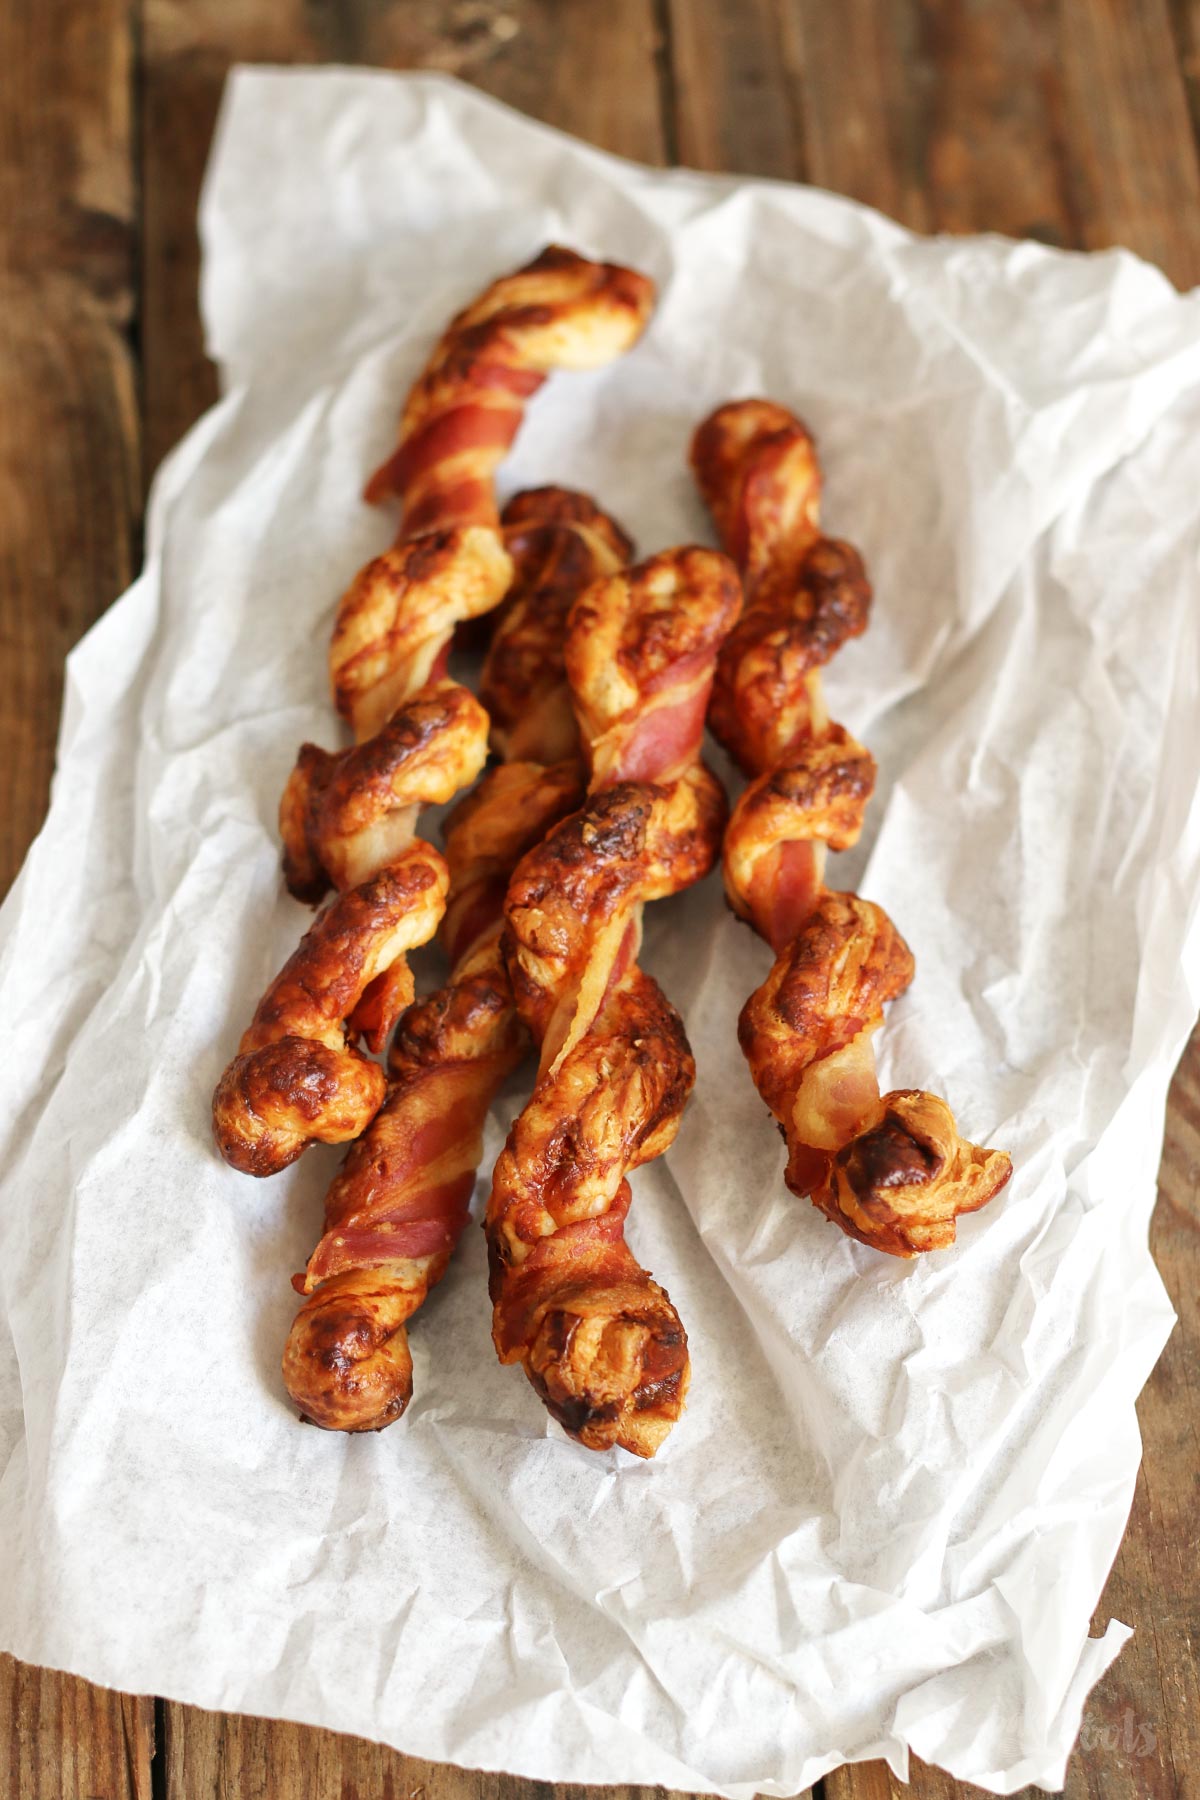 Cheesy Bacon Wrapped Puff Pastry Sticks | Bake to the roots